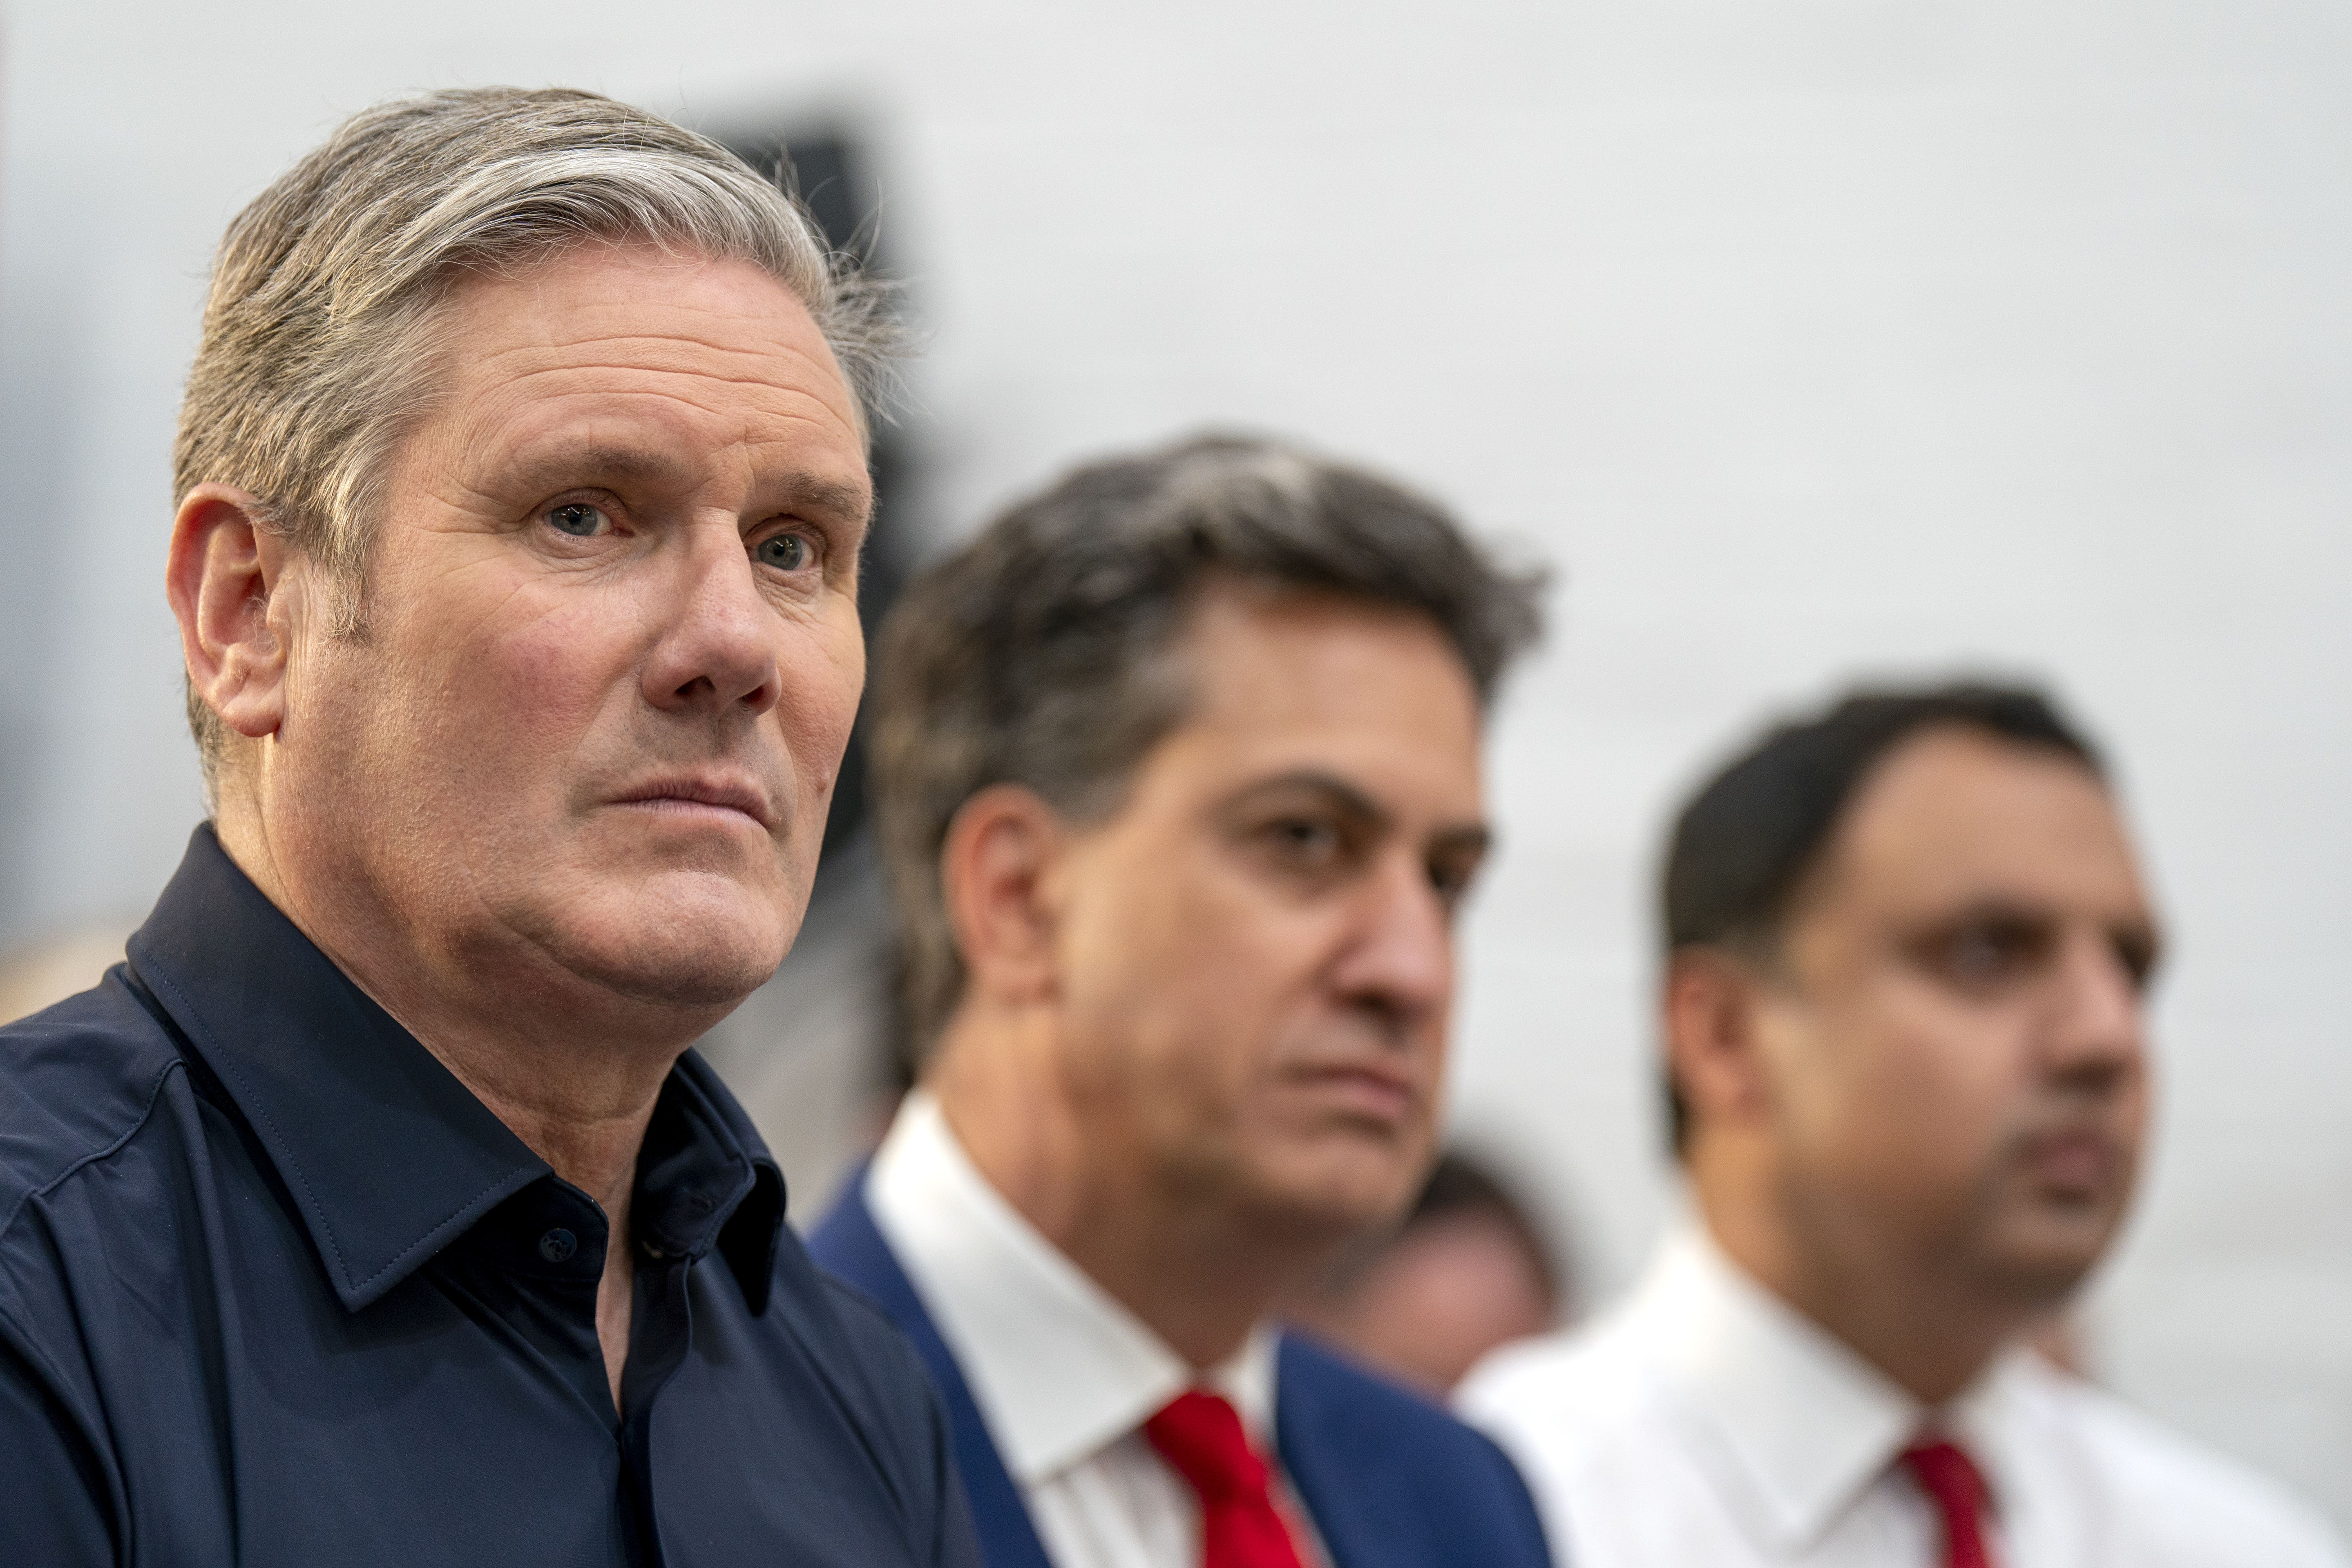 Everyone has taken sides now, which makes Starmer’s decision more complicated